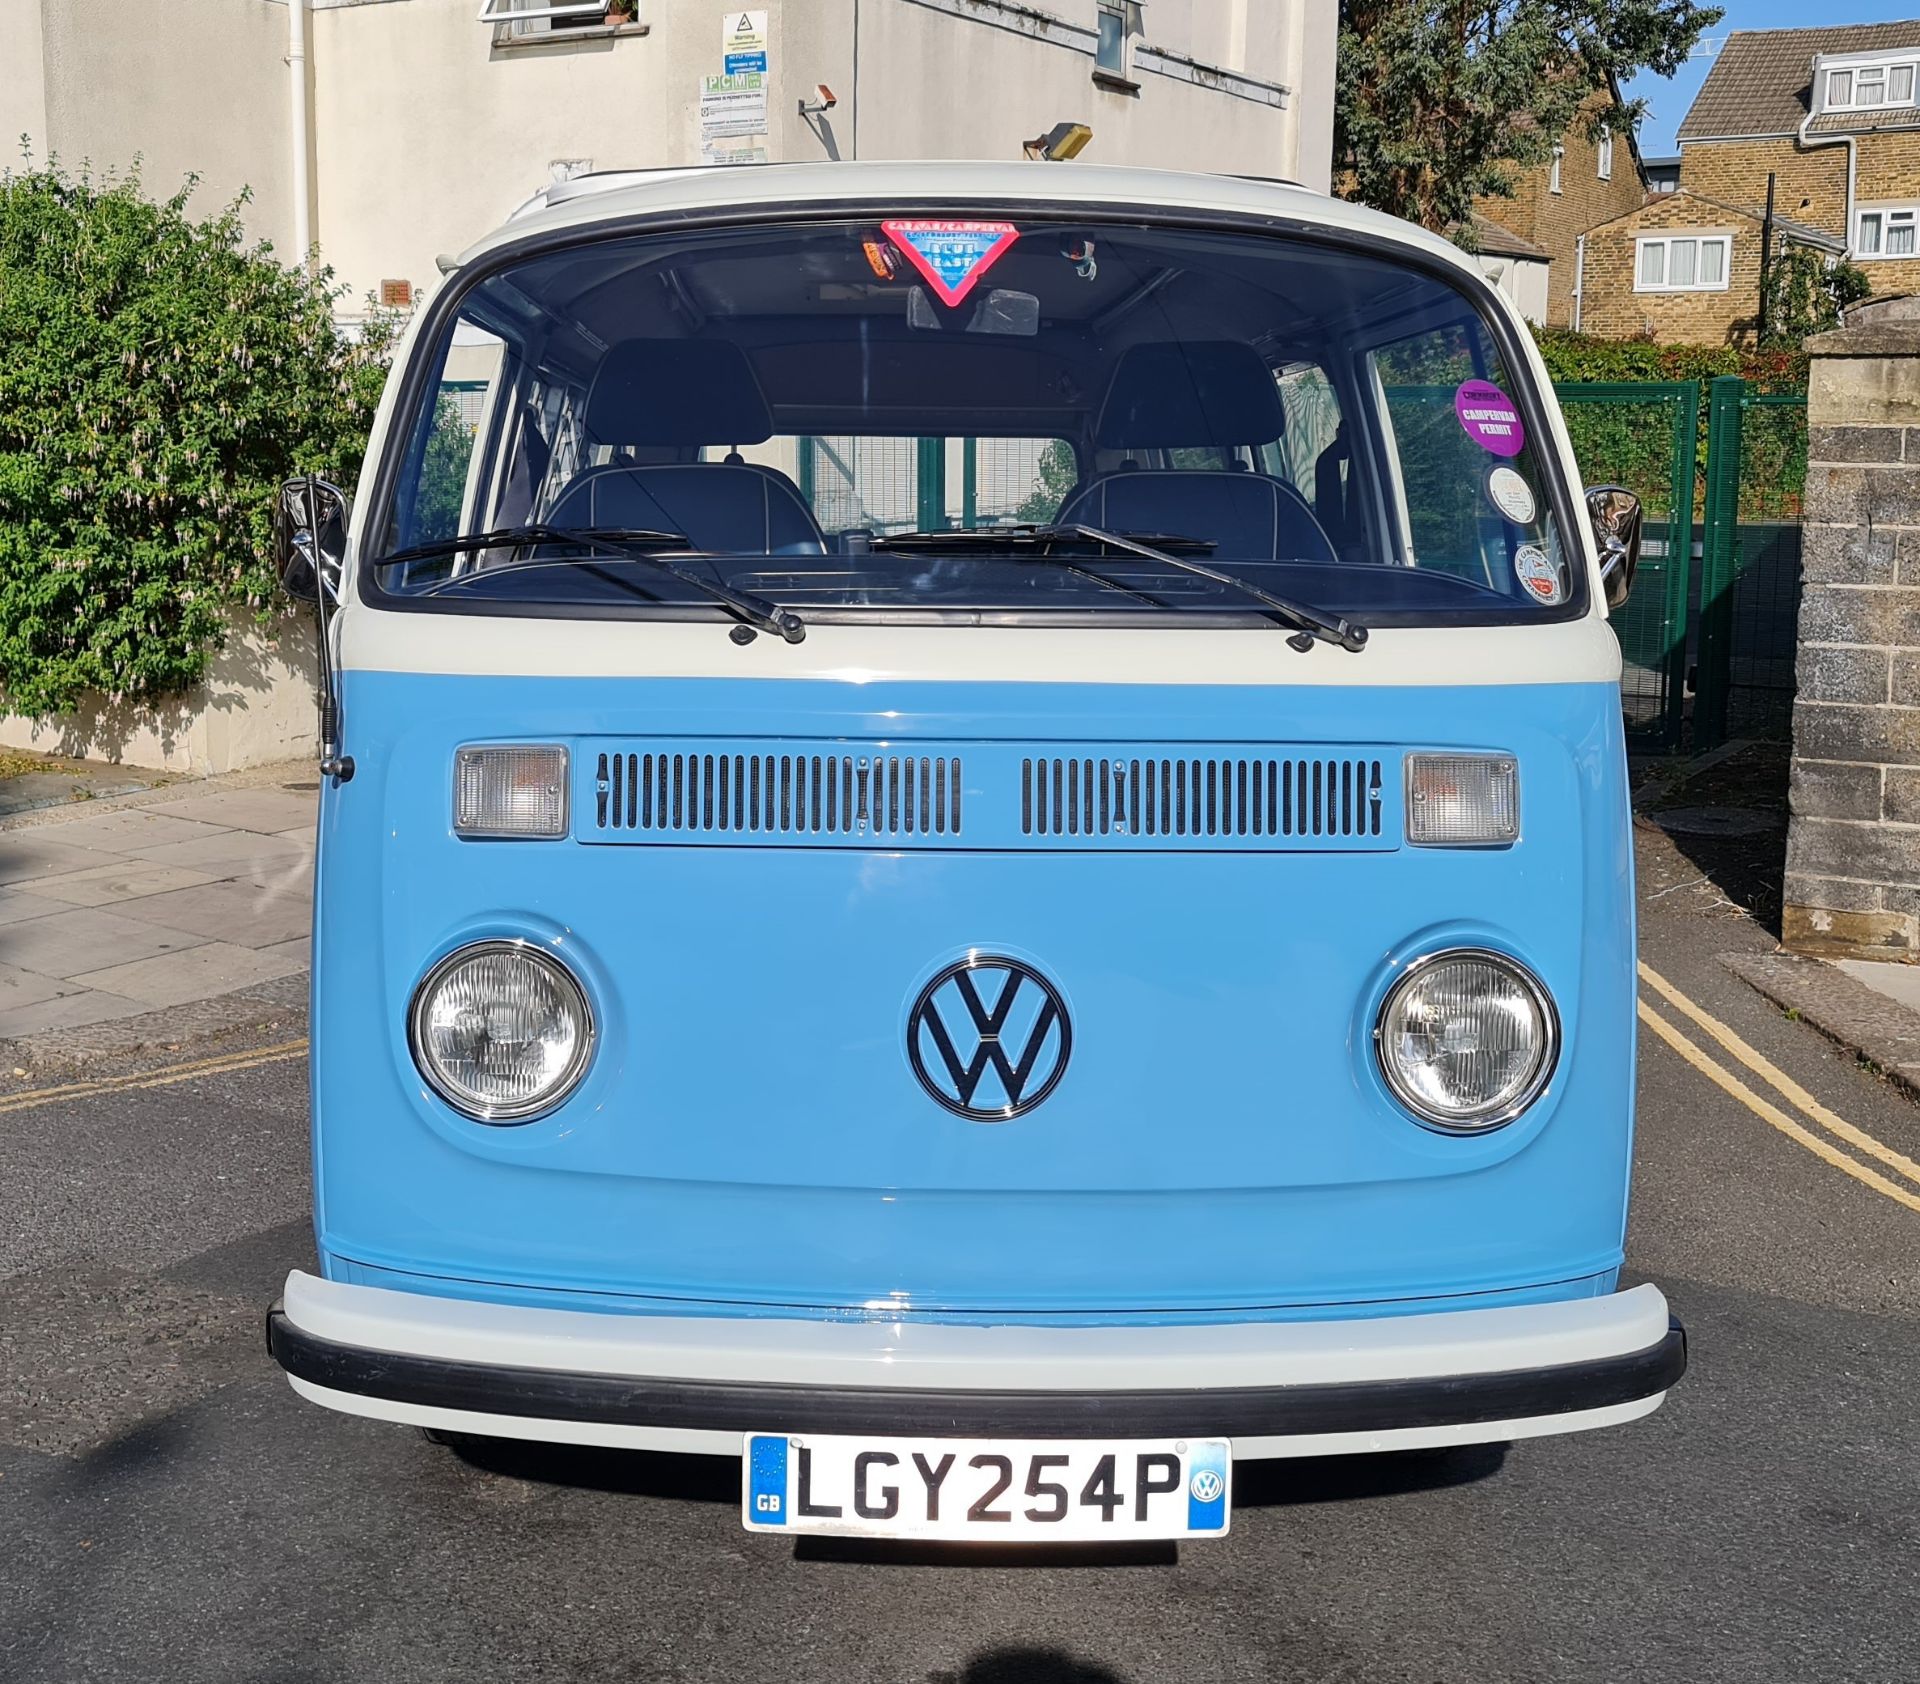 1976 VW Late Bay Window Camper Van Registration number LGY 254P White over blue with blue interior - Image 3 of 11